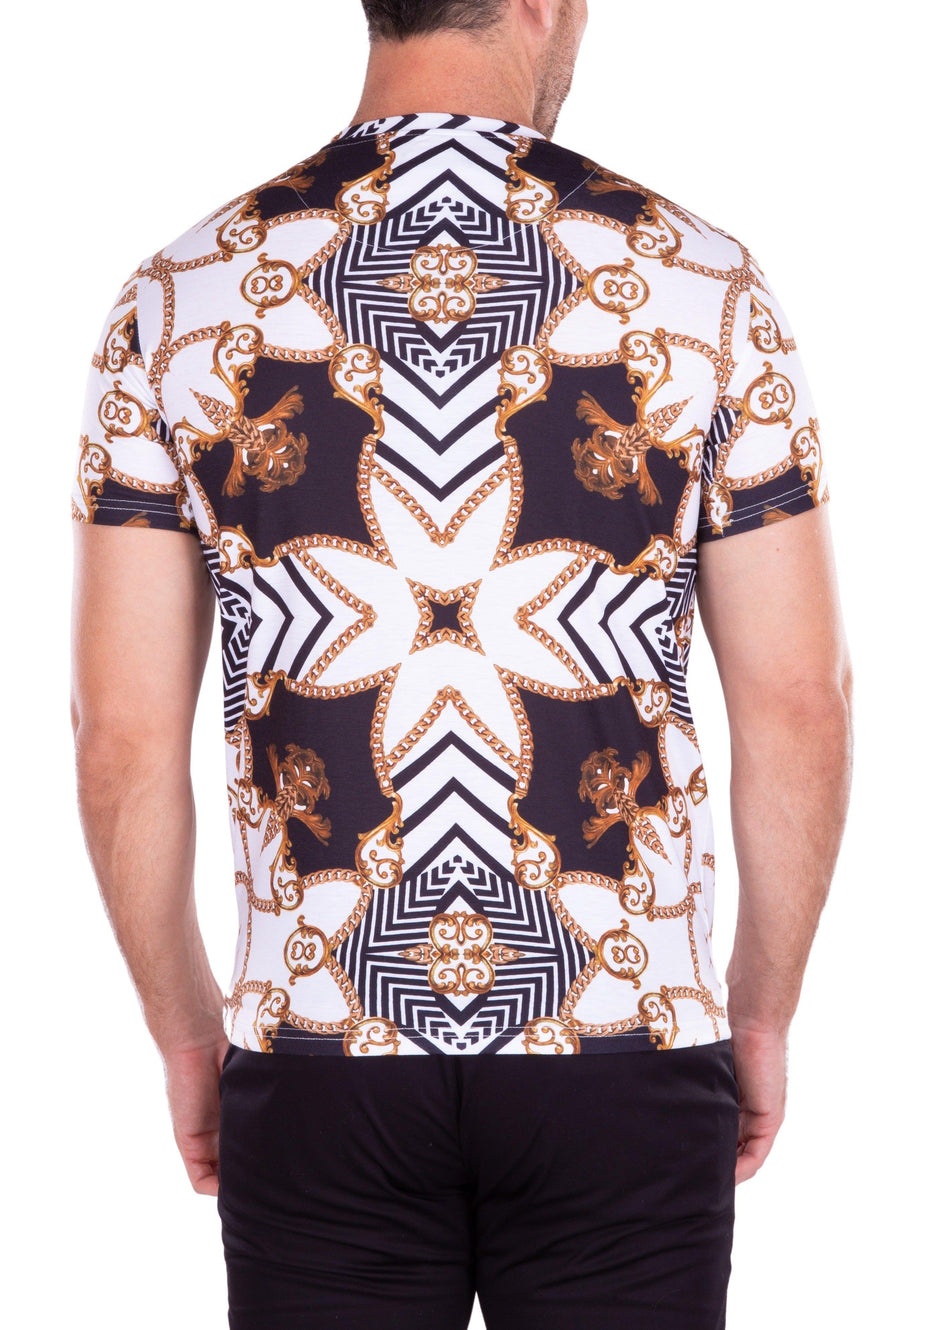 Contrast Geometric Chains Bold Printed All-Over Graphic Tee White